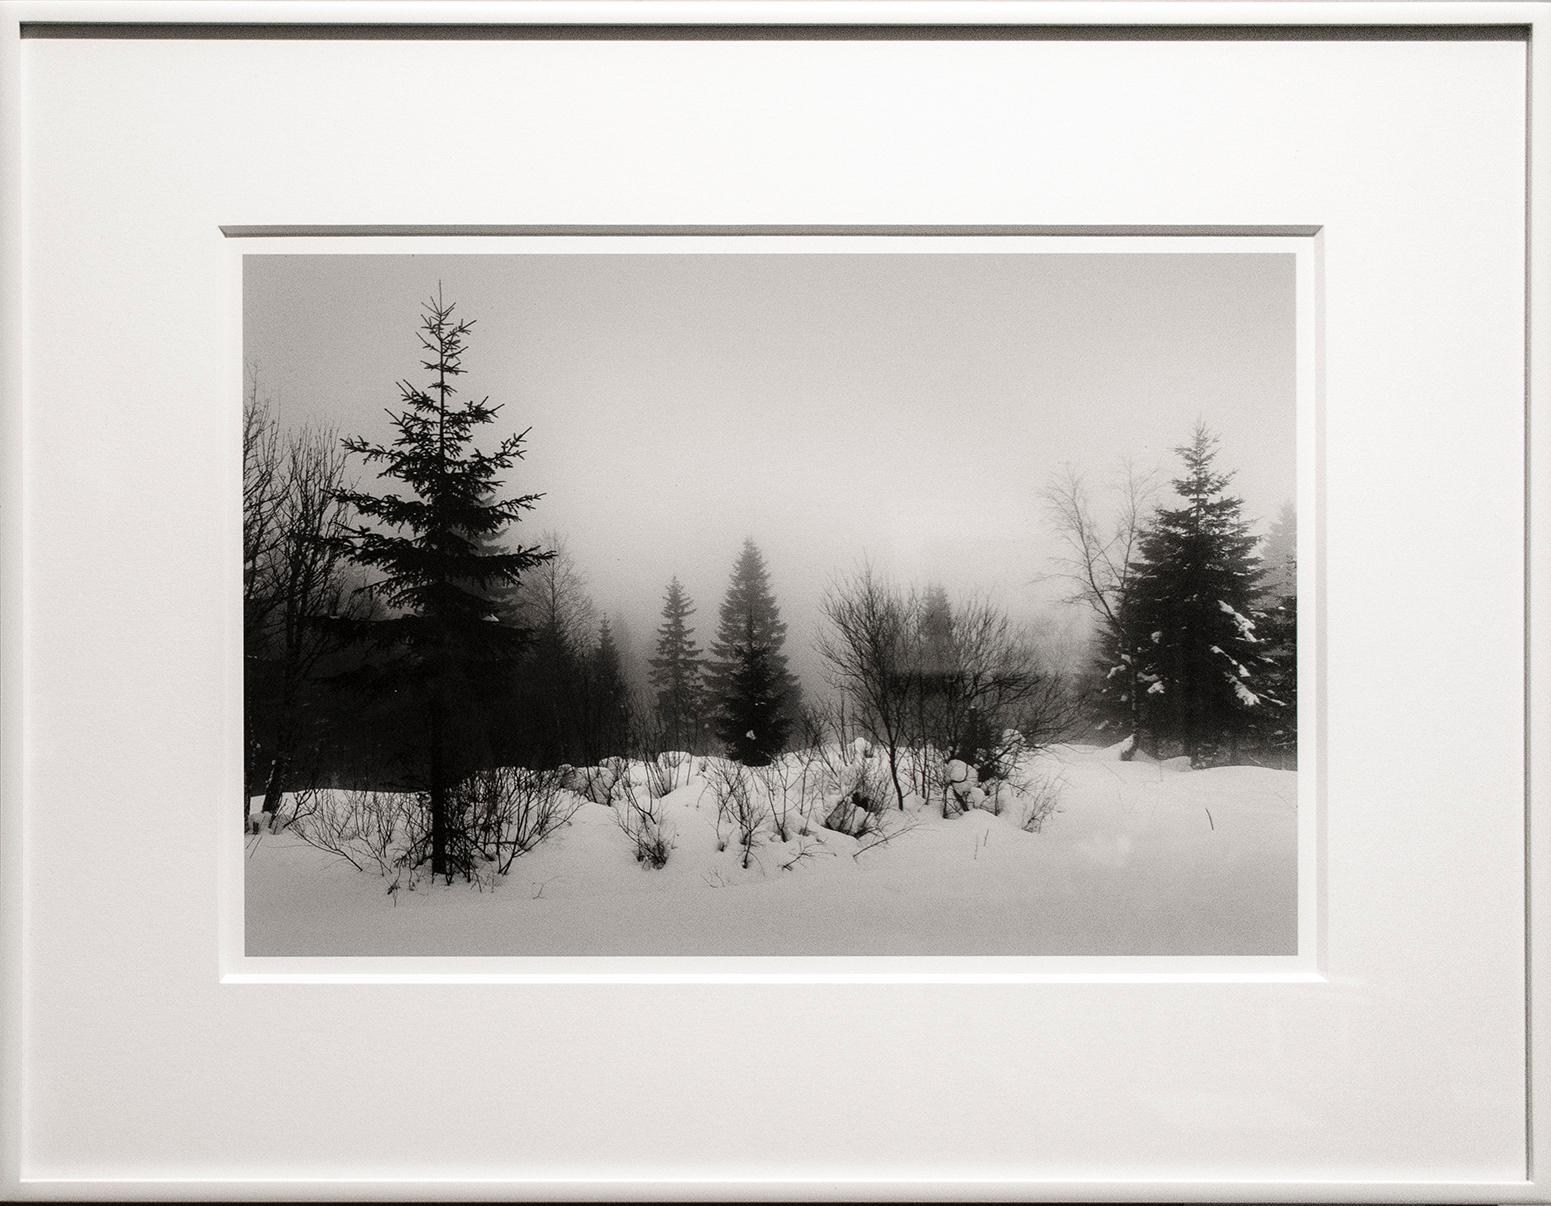 Trees and Mist (Black and White Landscape Photo of Forest in Winter in Finland) - Photograph by Betsy Weis